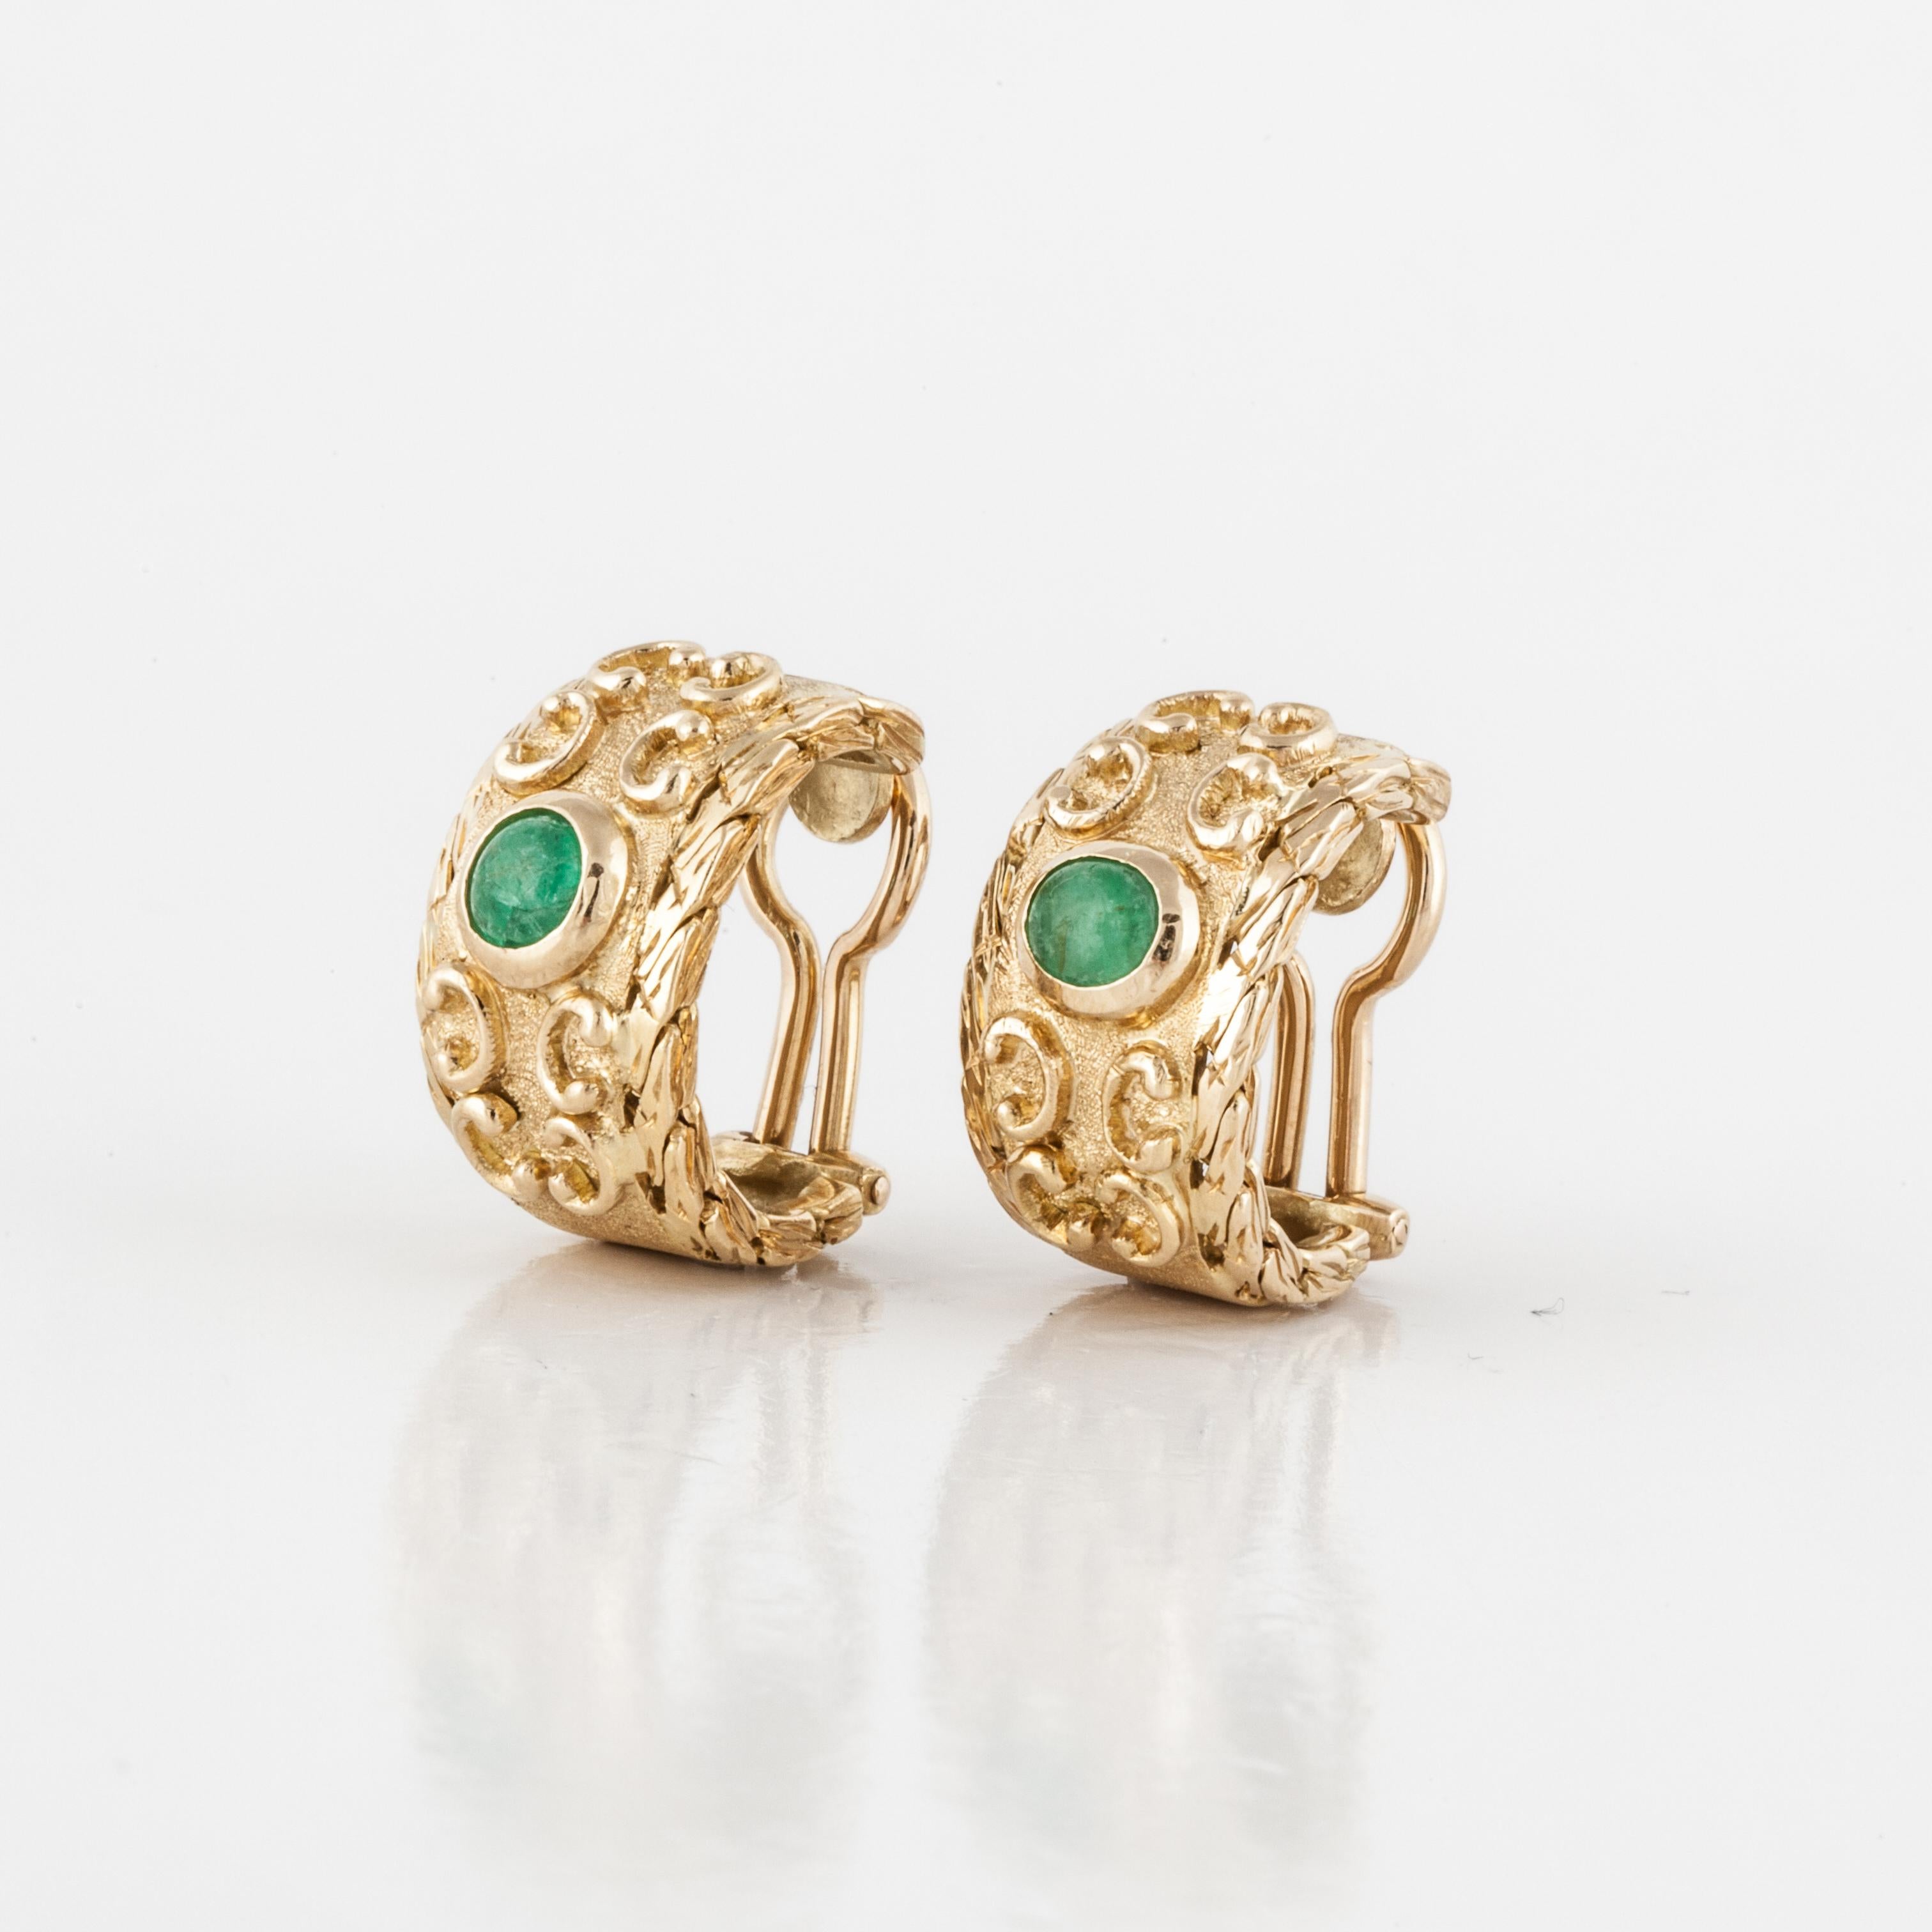 Buccellati semi hoop earrings in 18K yellow gold, with scroll work and cabochon emeralds set in the center.  There are two cabochon emeralds that total 1 carat.  Marked 